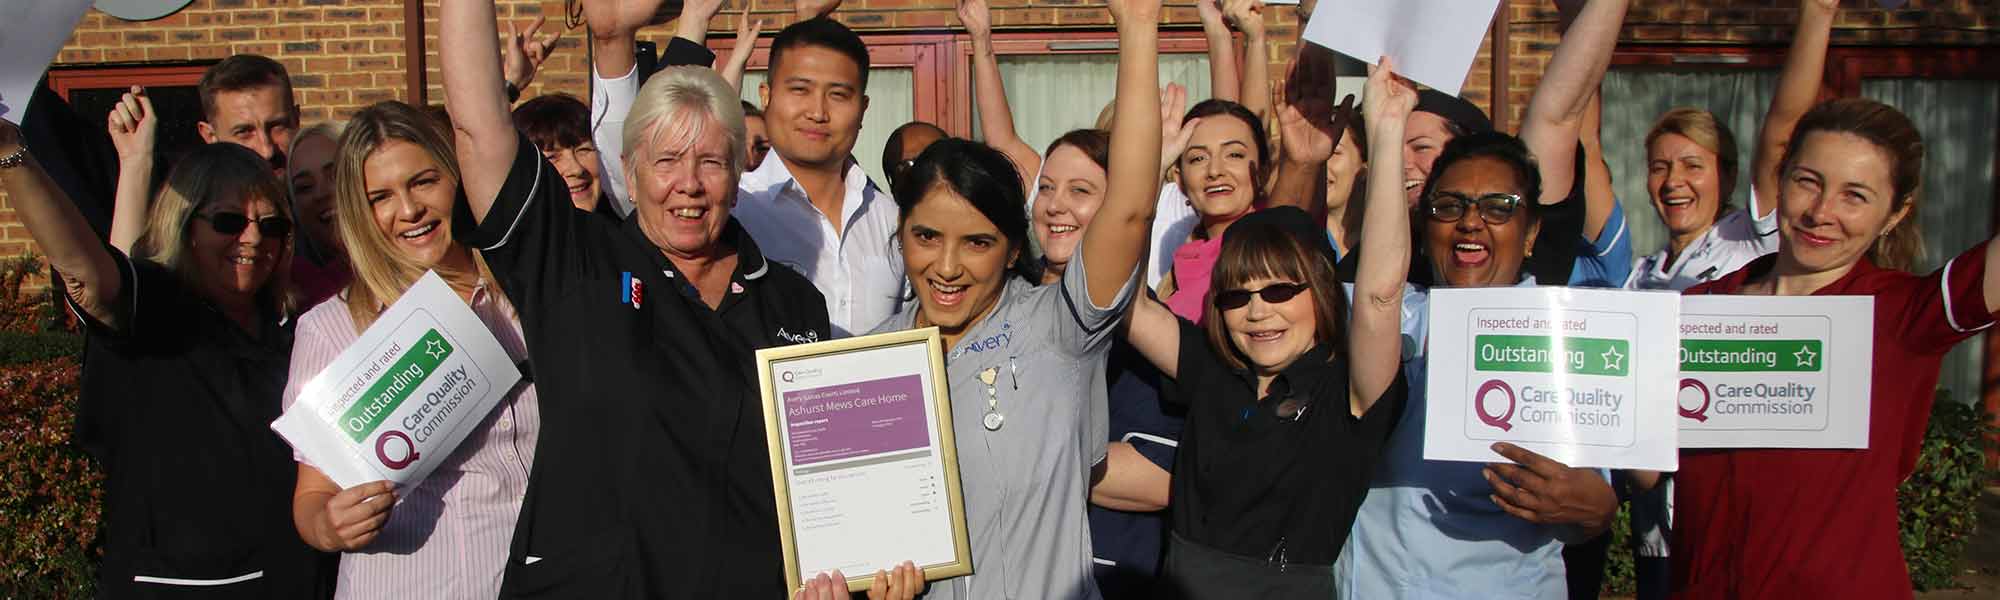 Rex and team at Ashurst Mews celebrate CQC Outstanding banner hero